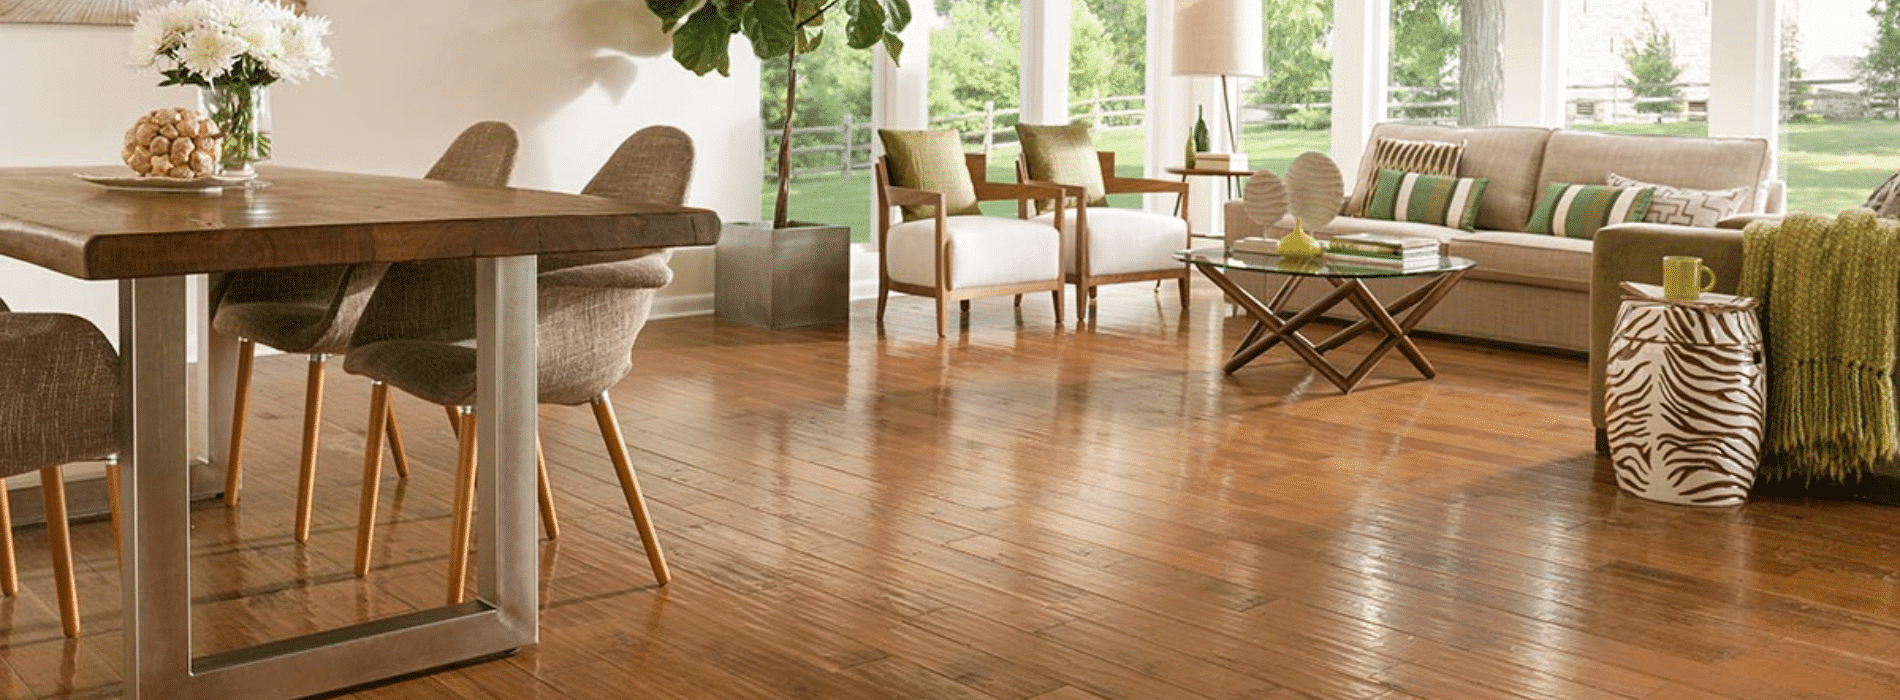 Expertly restored 7-year-old hardwood floor in Northolt, UB5. Mr Sander® used Bona 2.2K Frost whitewashing and Traffic HD 16% sheen matte lacquer. Durable and stunning, this finish guarantees long-lasting beauty. 